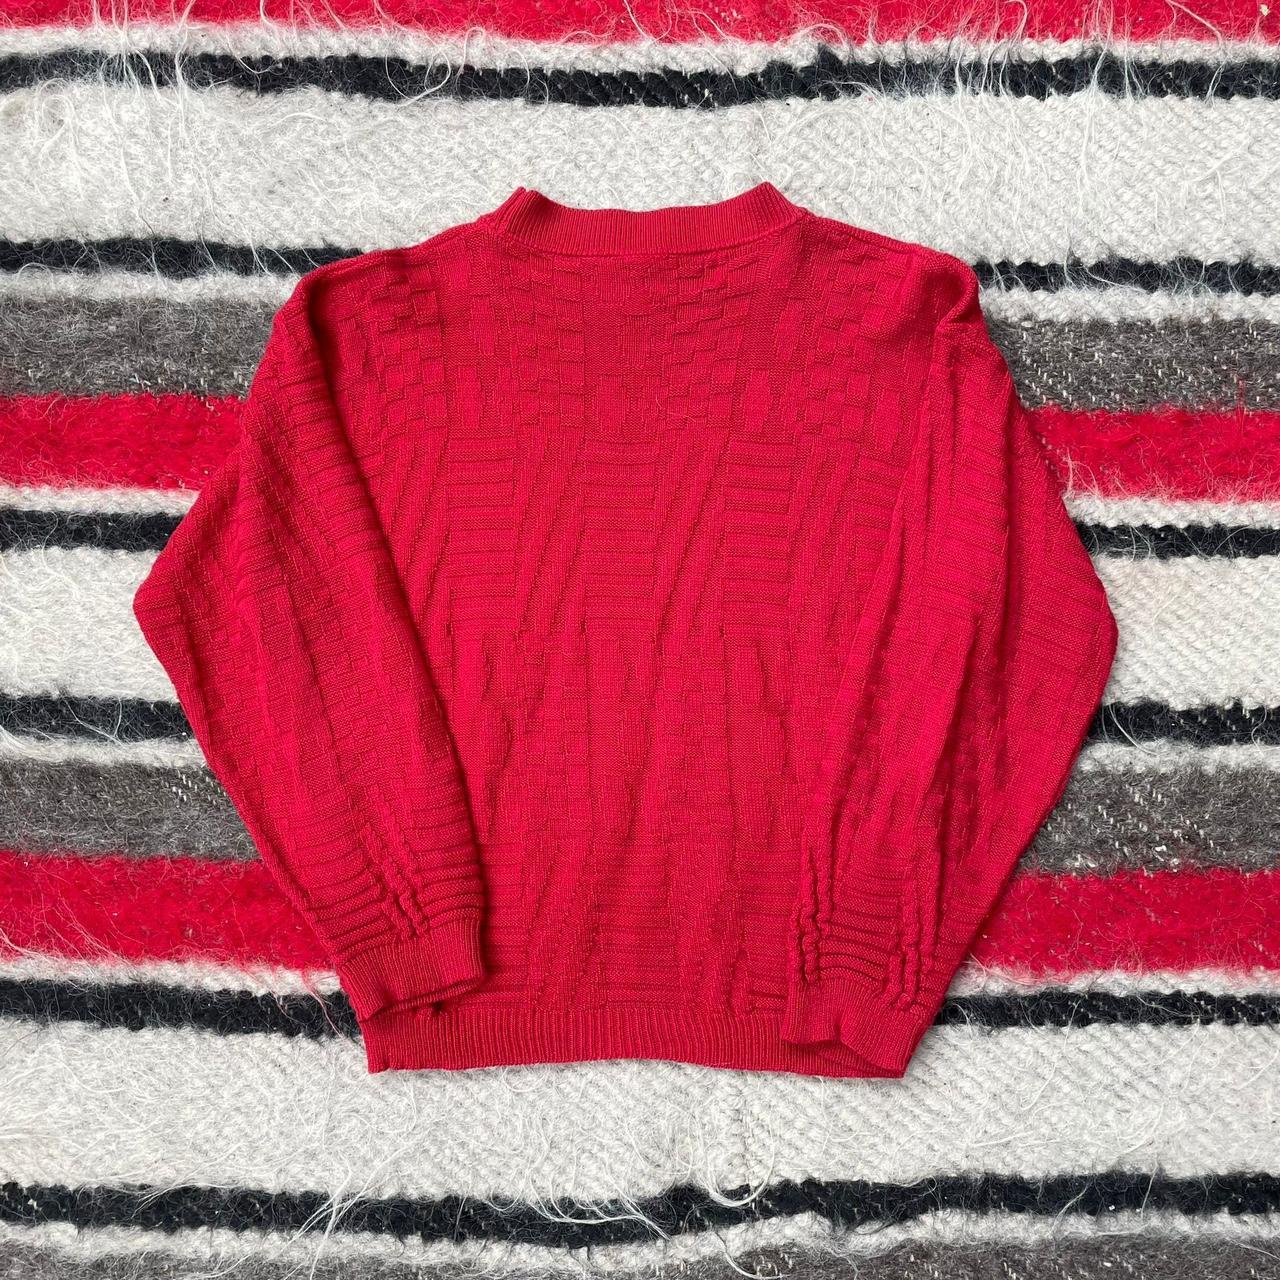 Vintage 1960s 1970s Red Laurie Stacey Patterned Knit... - Depop